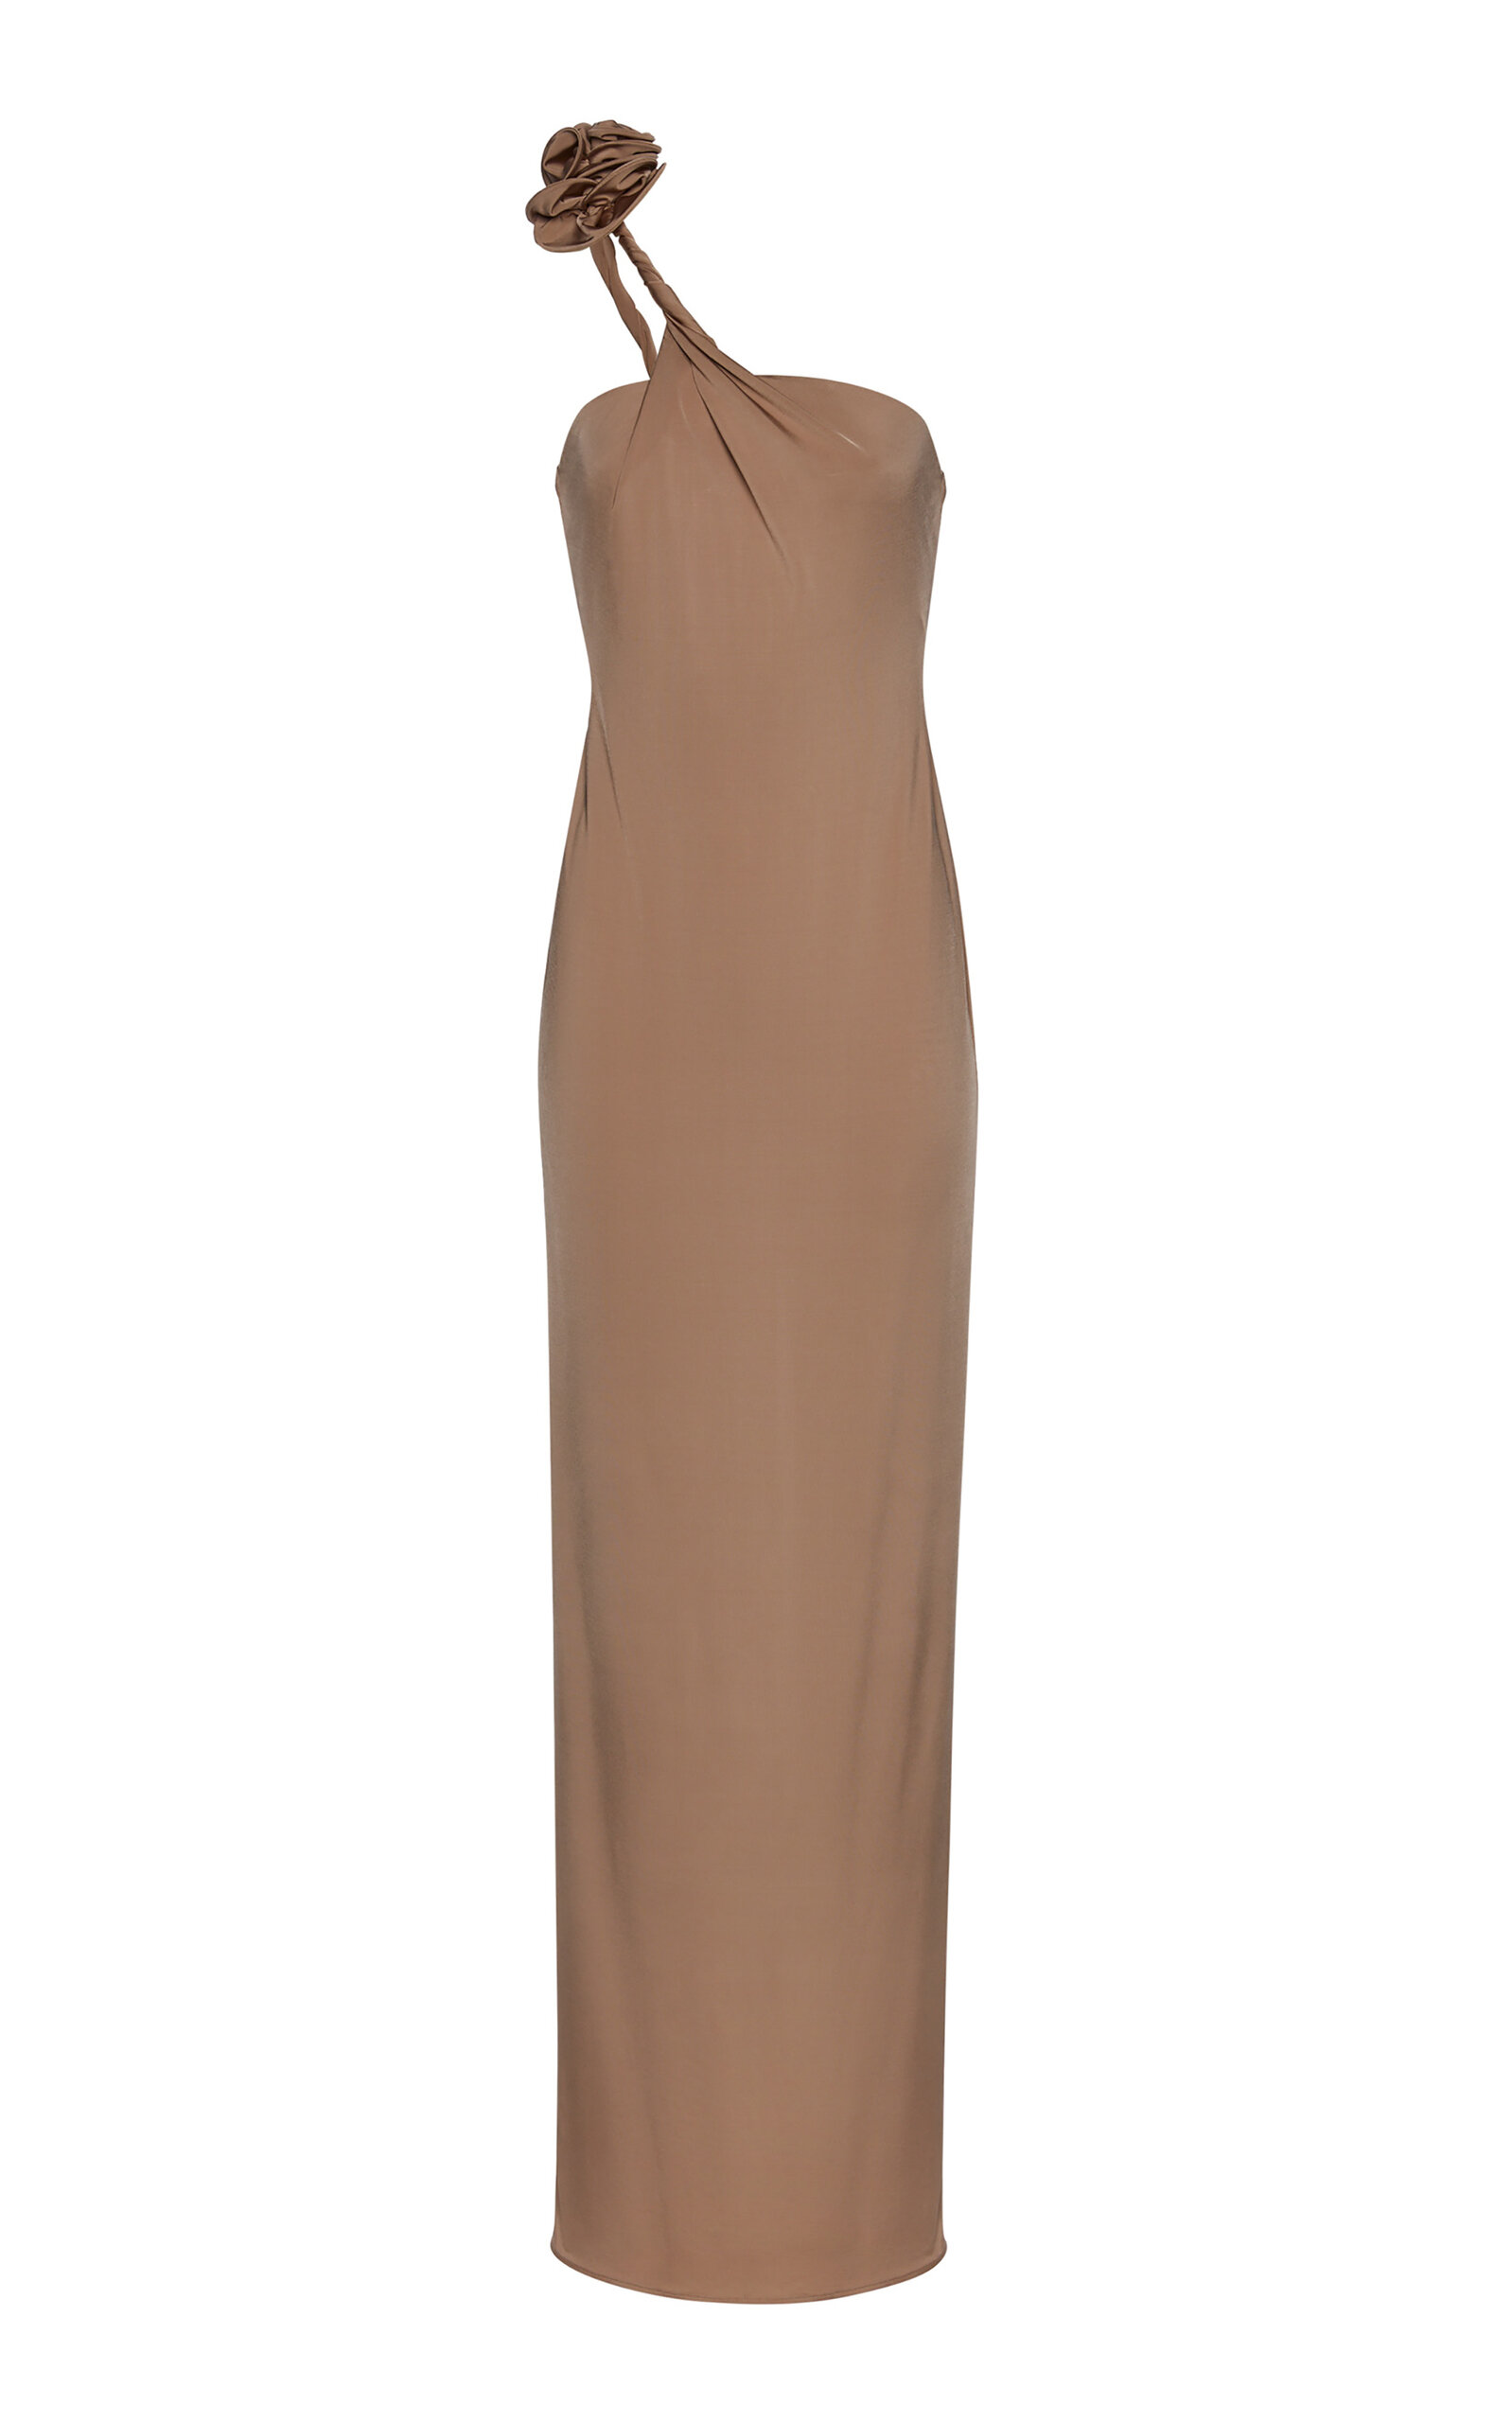 Magda Butrym Floral-detailed Dress In Tan